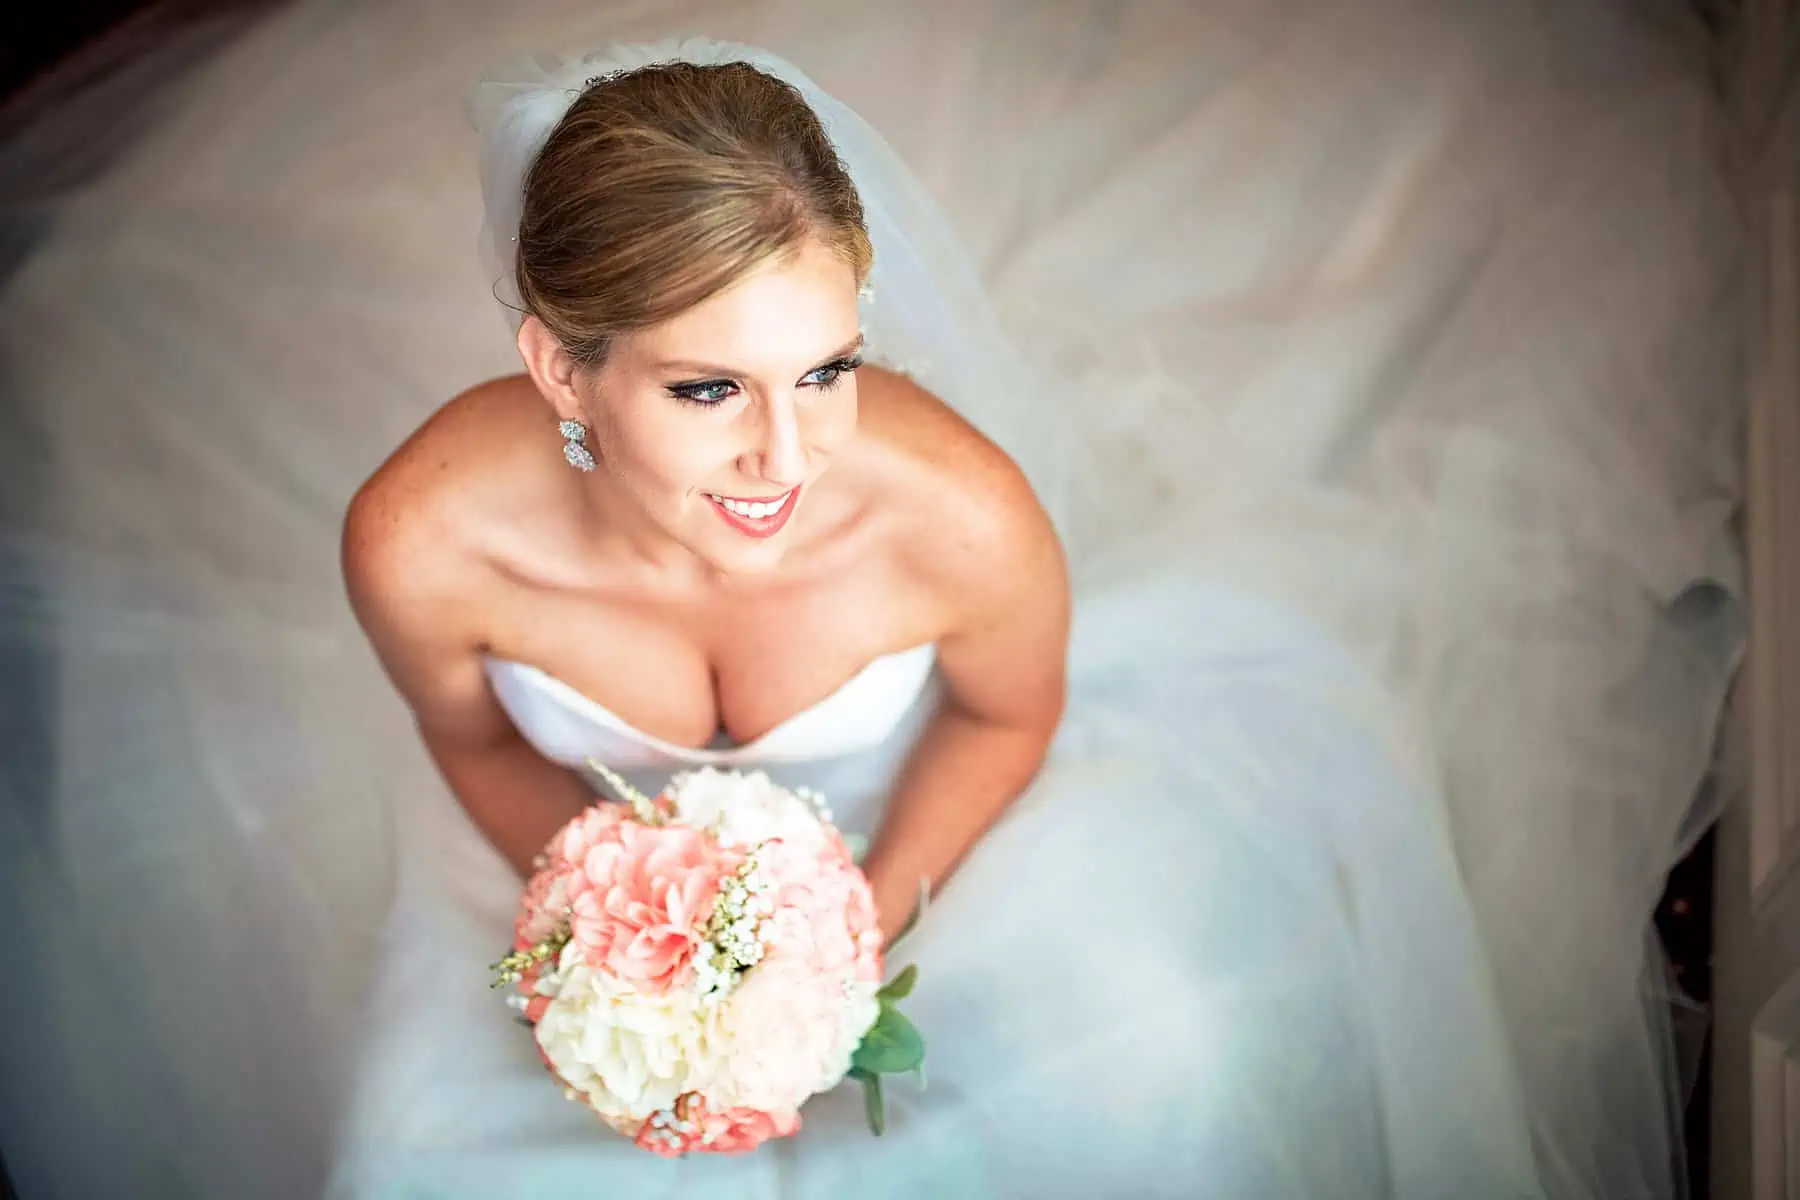 A bride in a wedding dress posing with her bouquet.